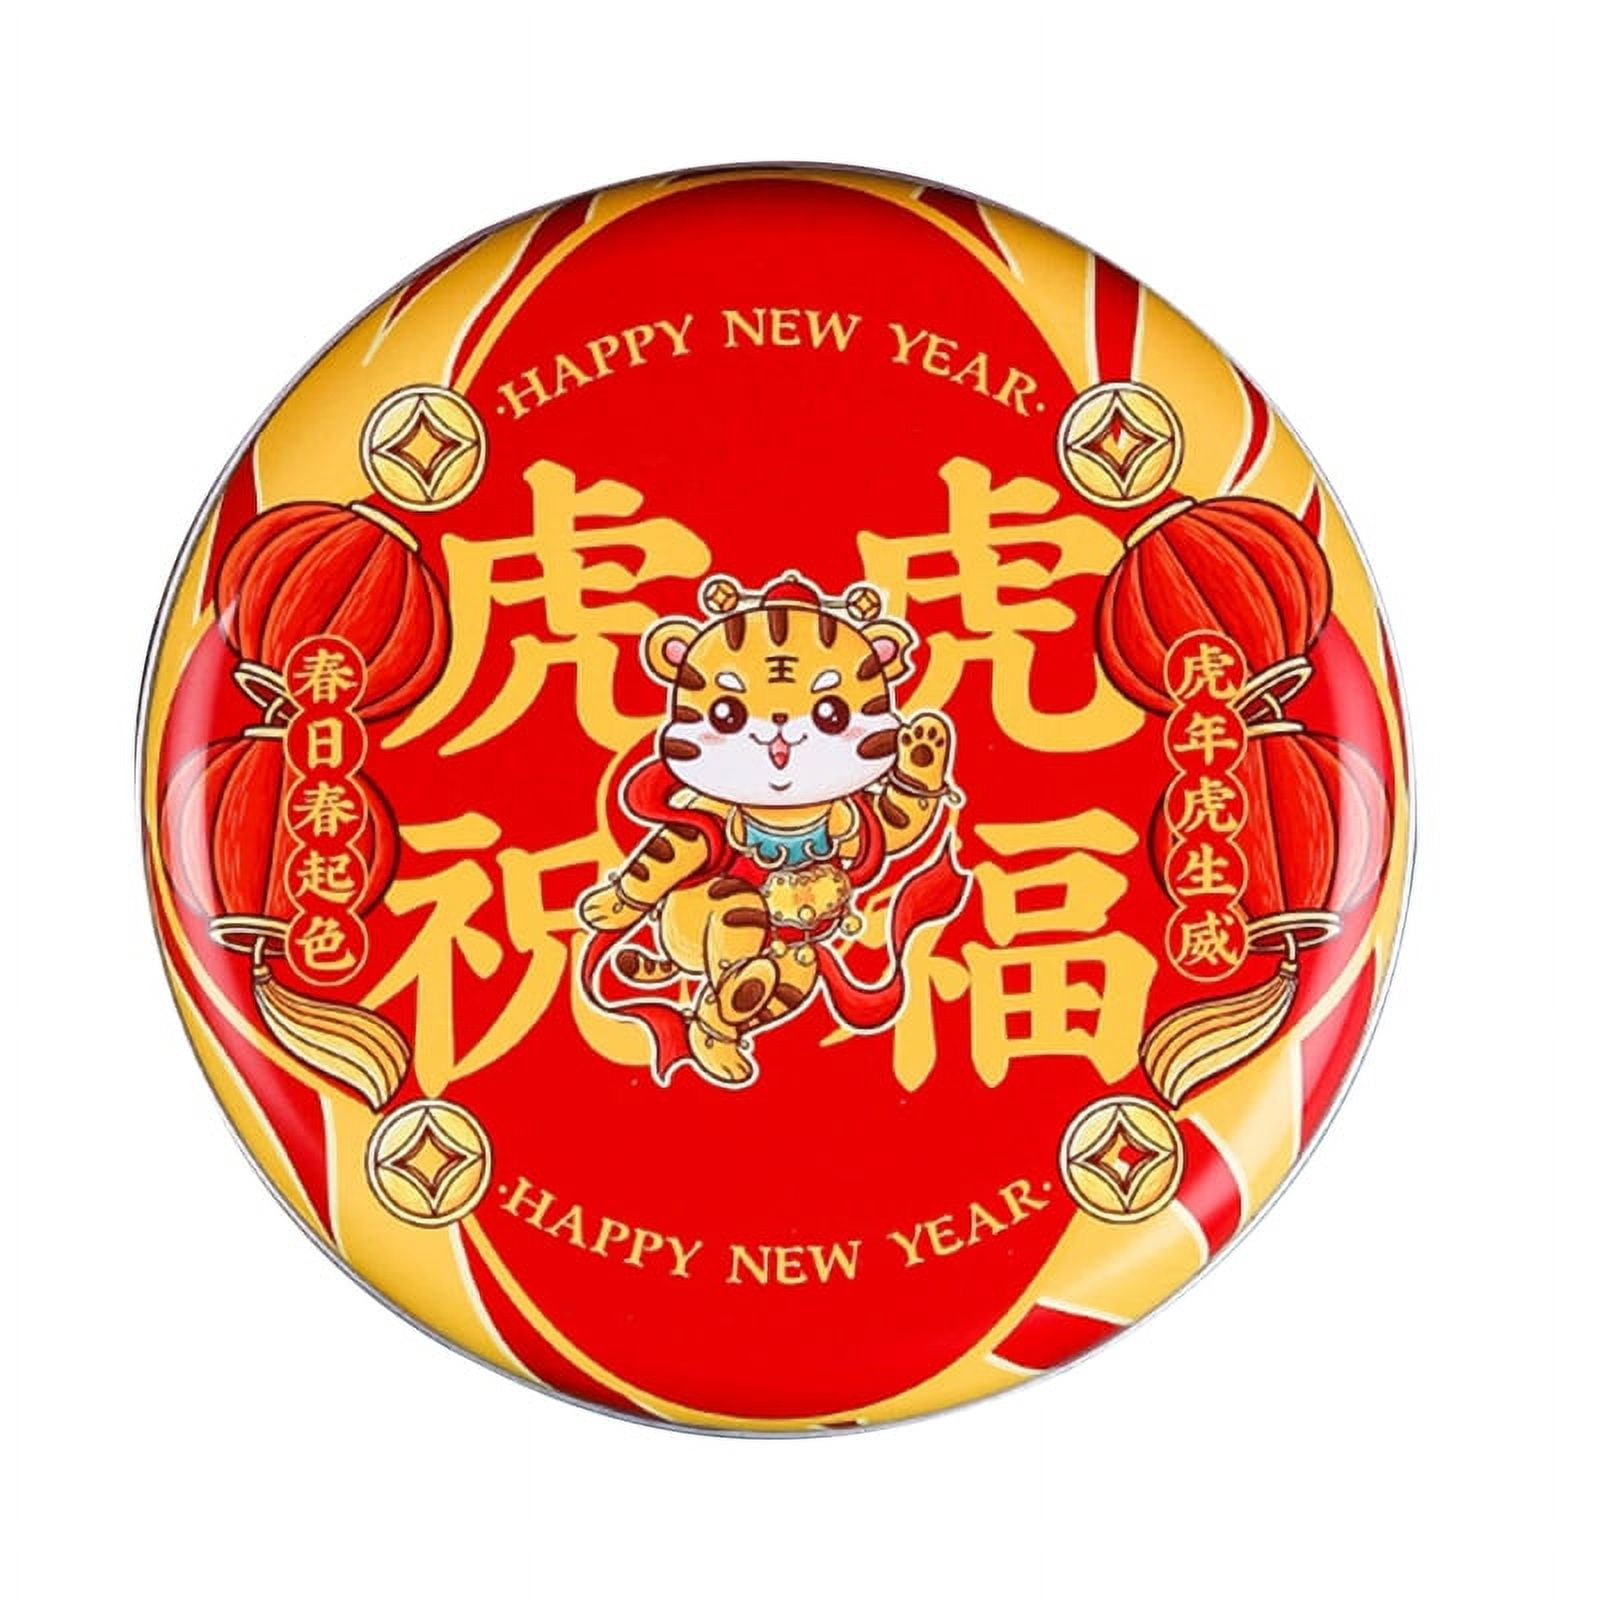 Chinese New Year 2022 sticker pack for intermediaries to greet